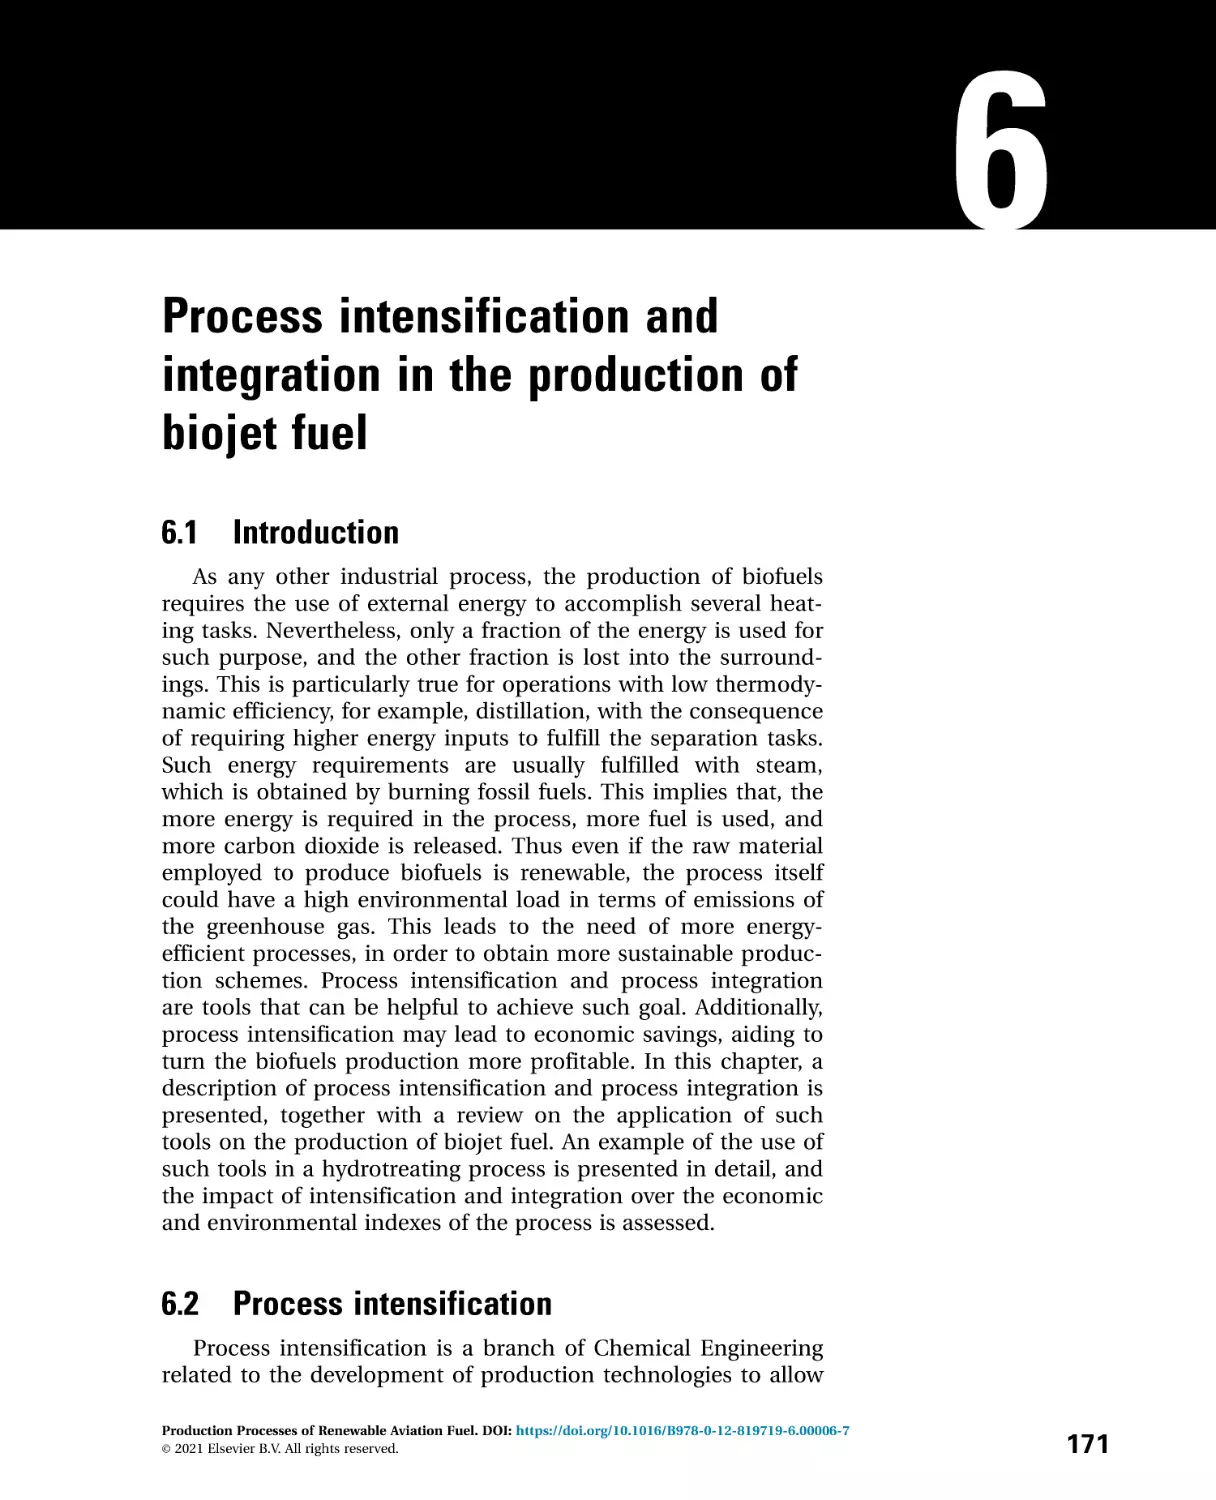 6---Process-intensification-and-integration-_2021_Production-Processes-of-Re
6 Process intensification and integration in the production of biojet fuel
6.1 Introduction
6.2 Process intensification